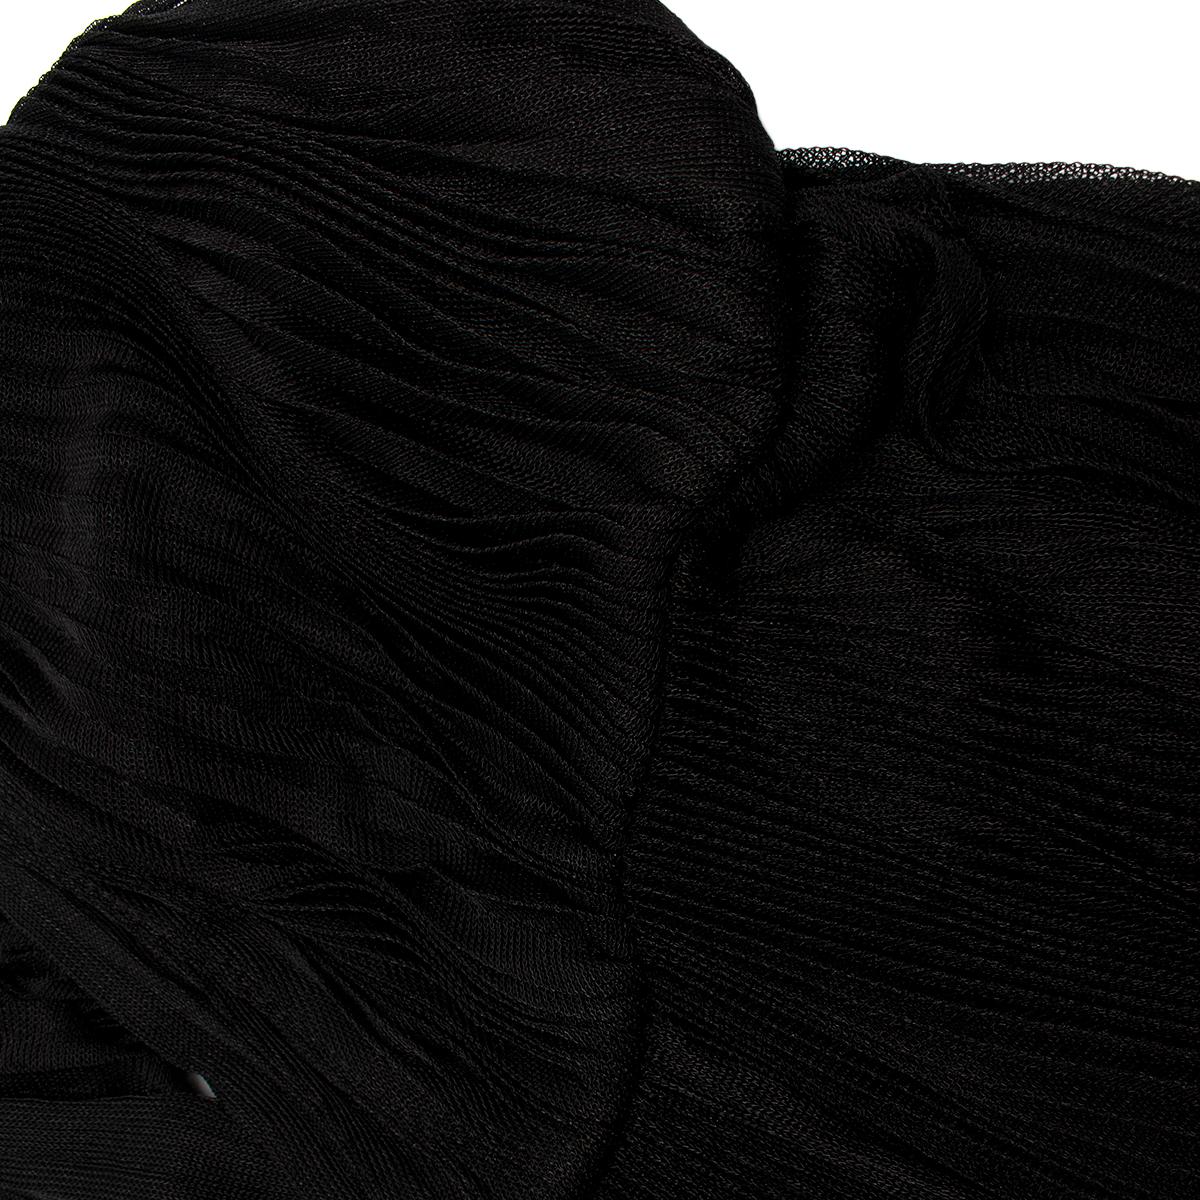 Maria Lucia Hohan Black Lurex Knit Pleated Dress - US Size 4 In Excellent Condition For Sale In London, GB